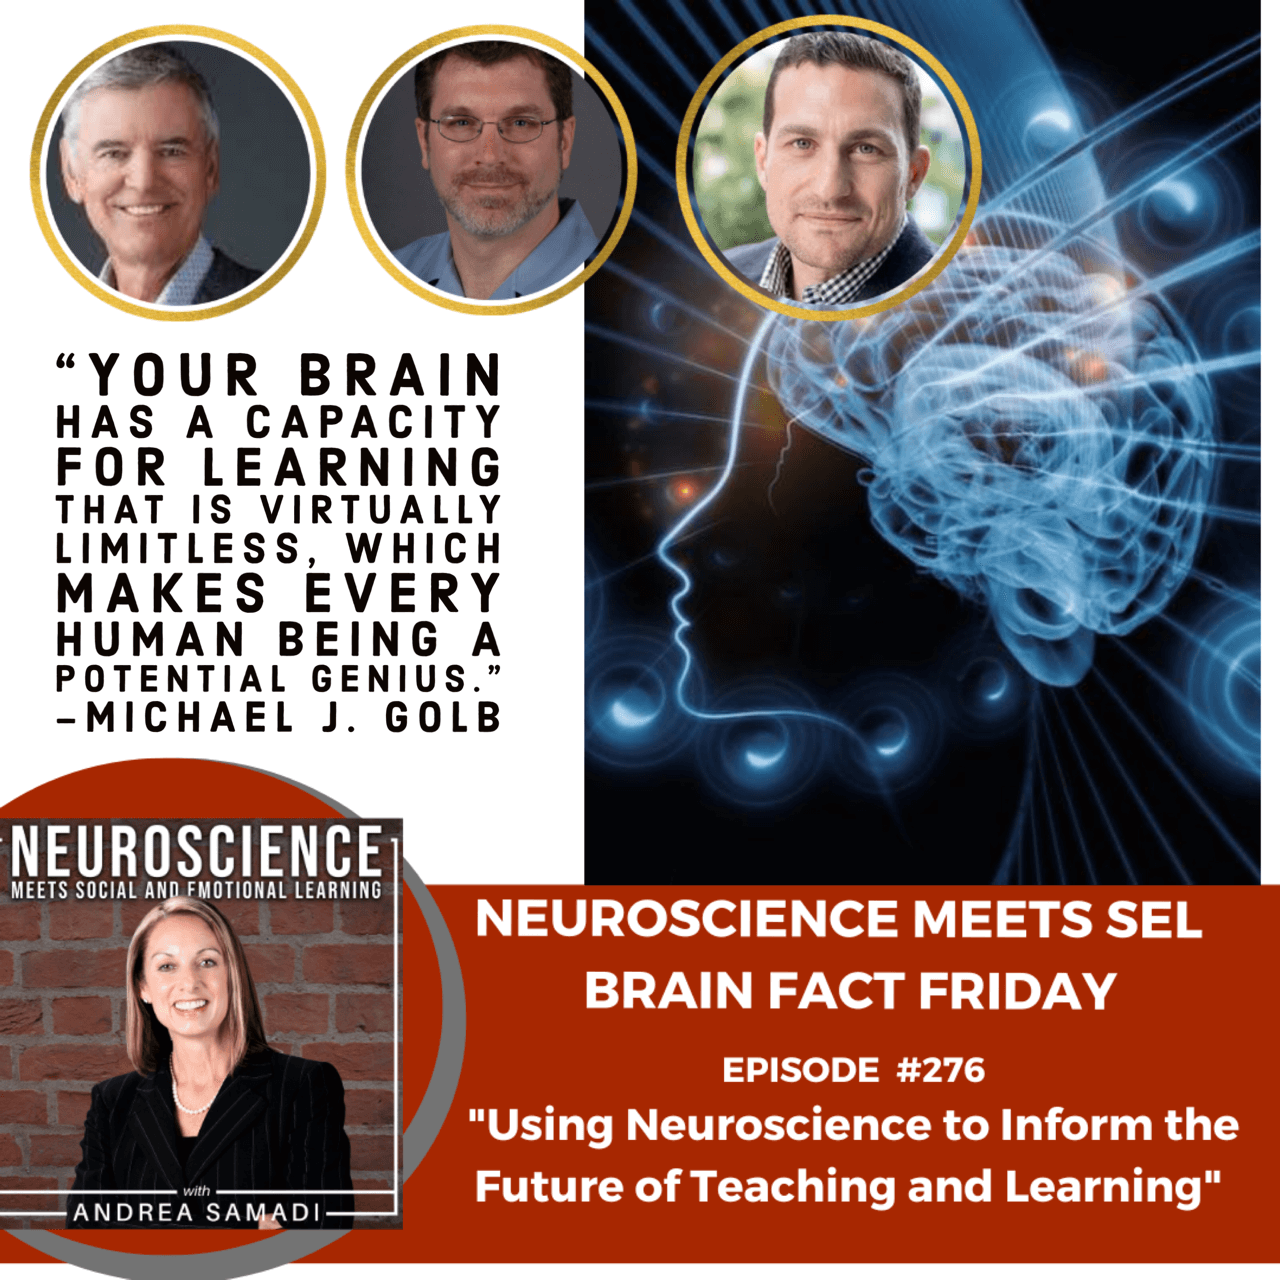 Brain Fact Friday ”Using Neuroscience to Inform the Future of Teaching and Learning”